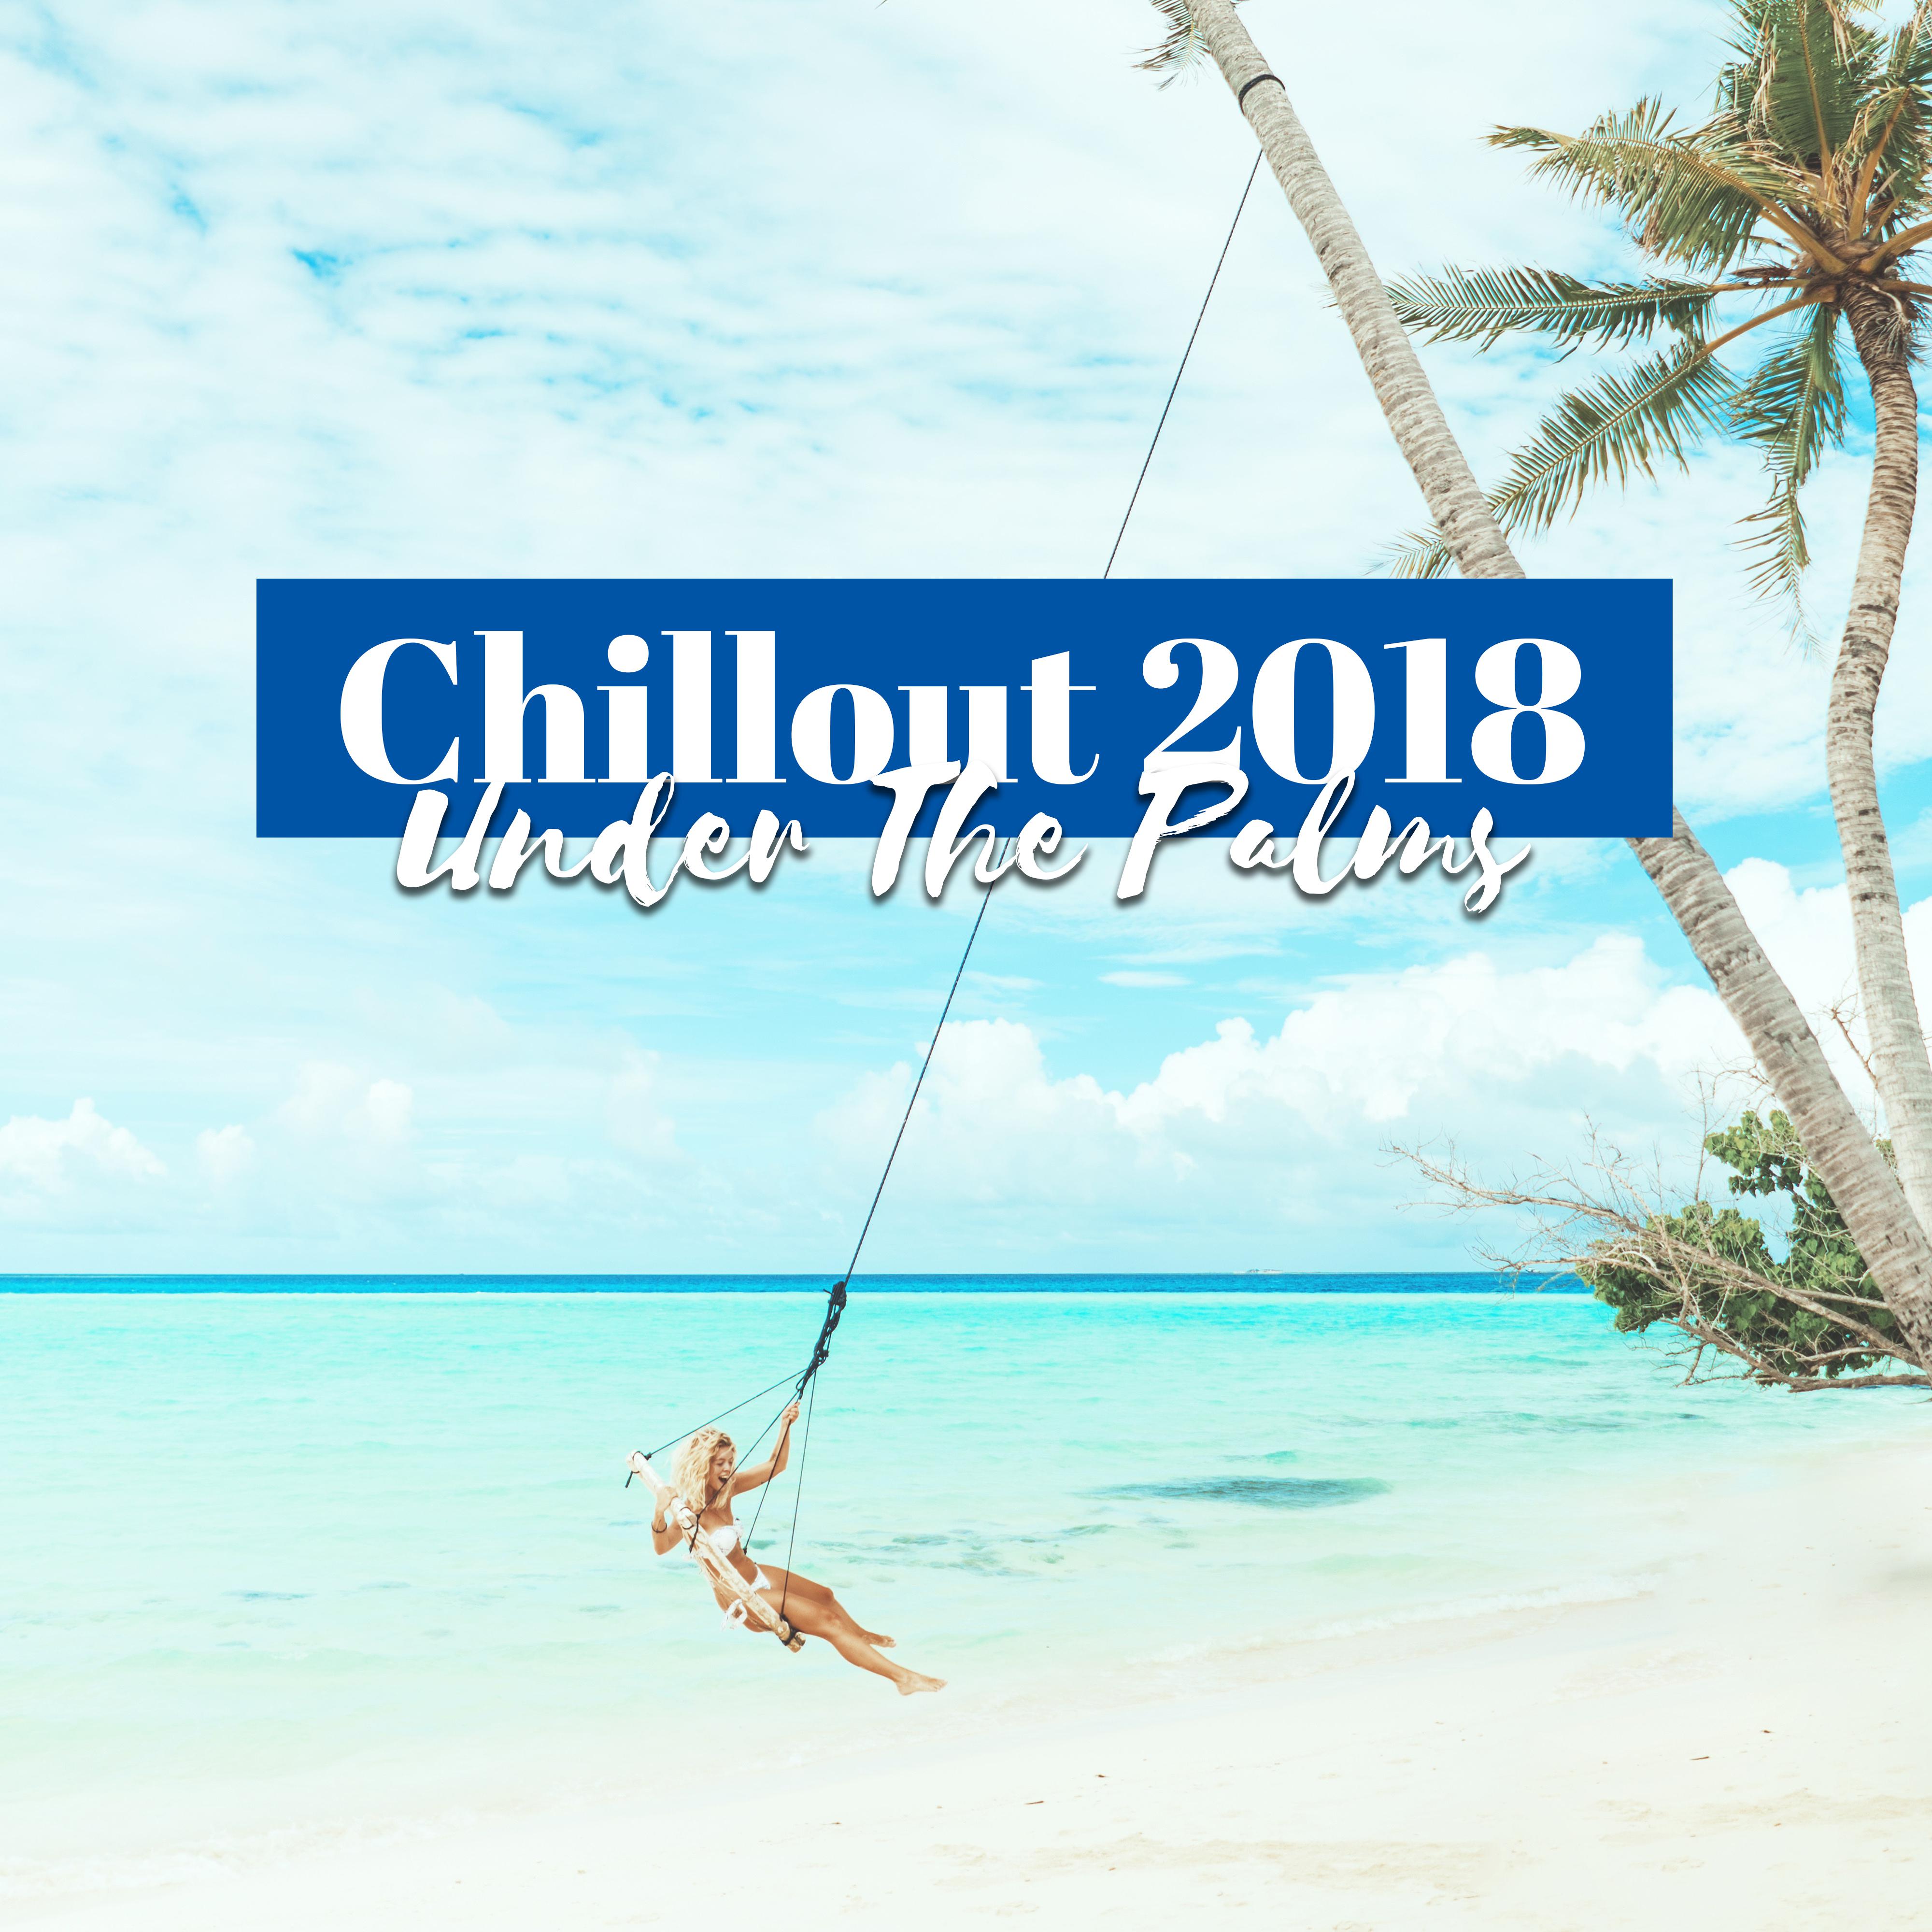 Chillout 2018 Under The Palms